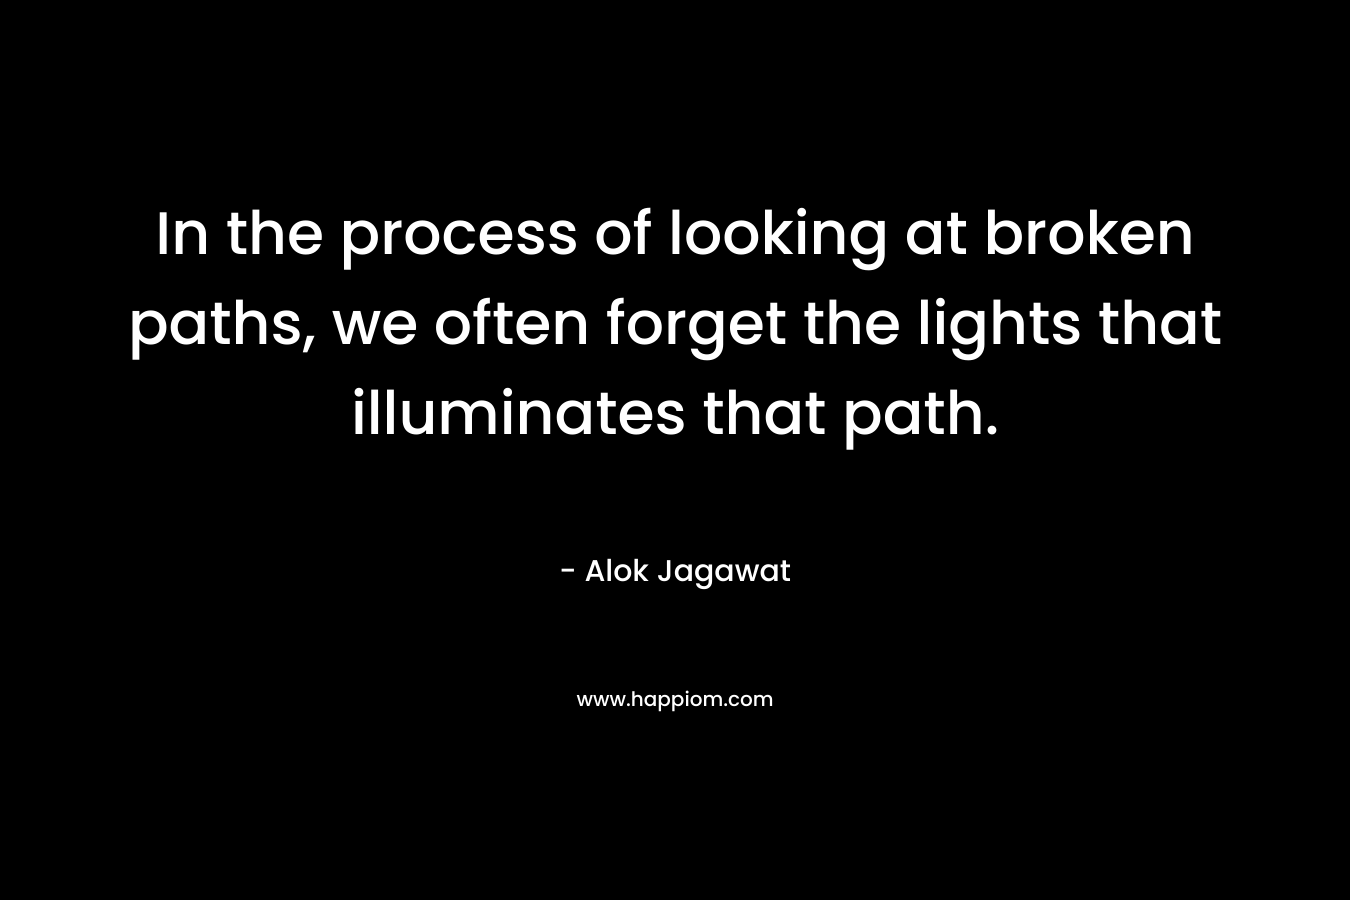 In the process of looking at broken paths, we often forget the lights that illuminates that path. – Alok Jagawat